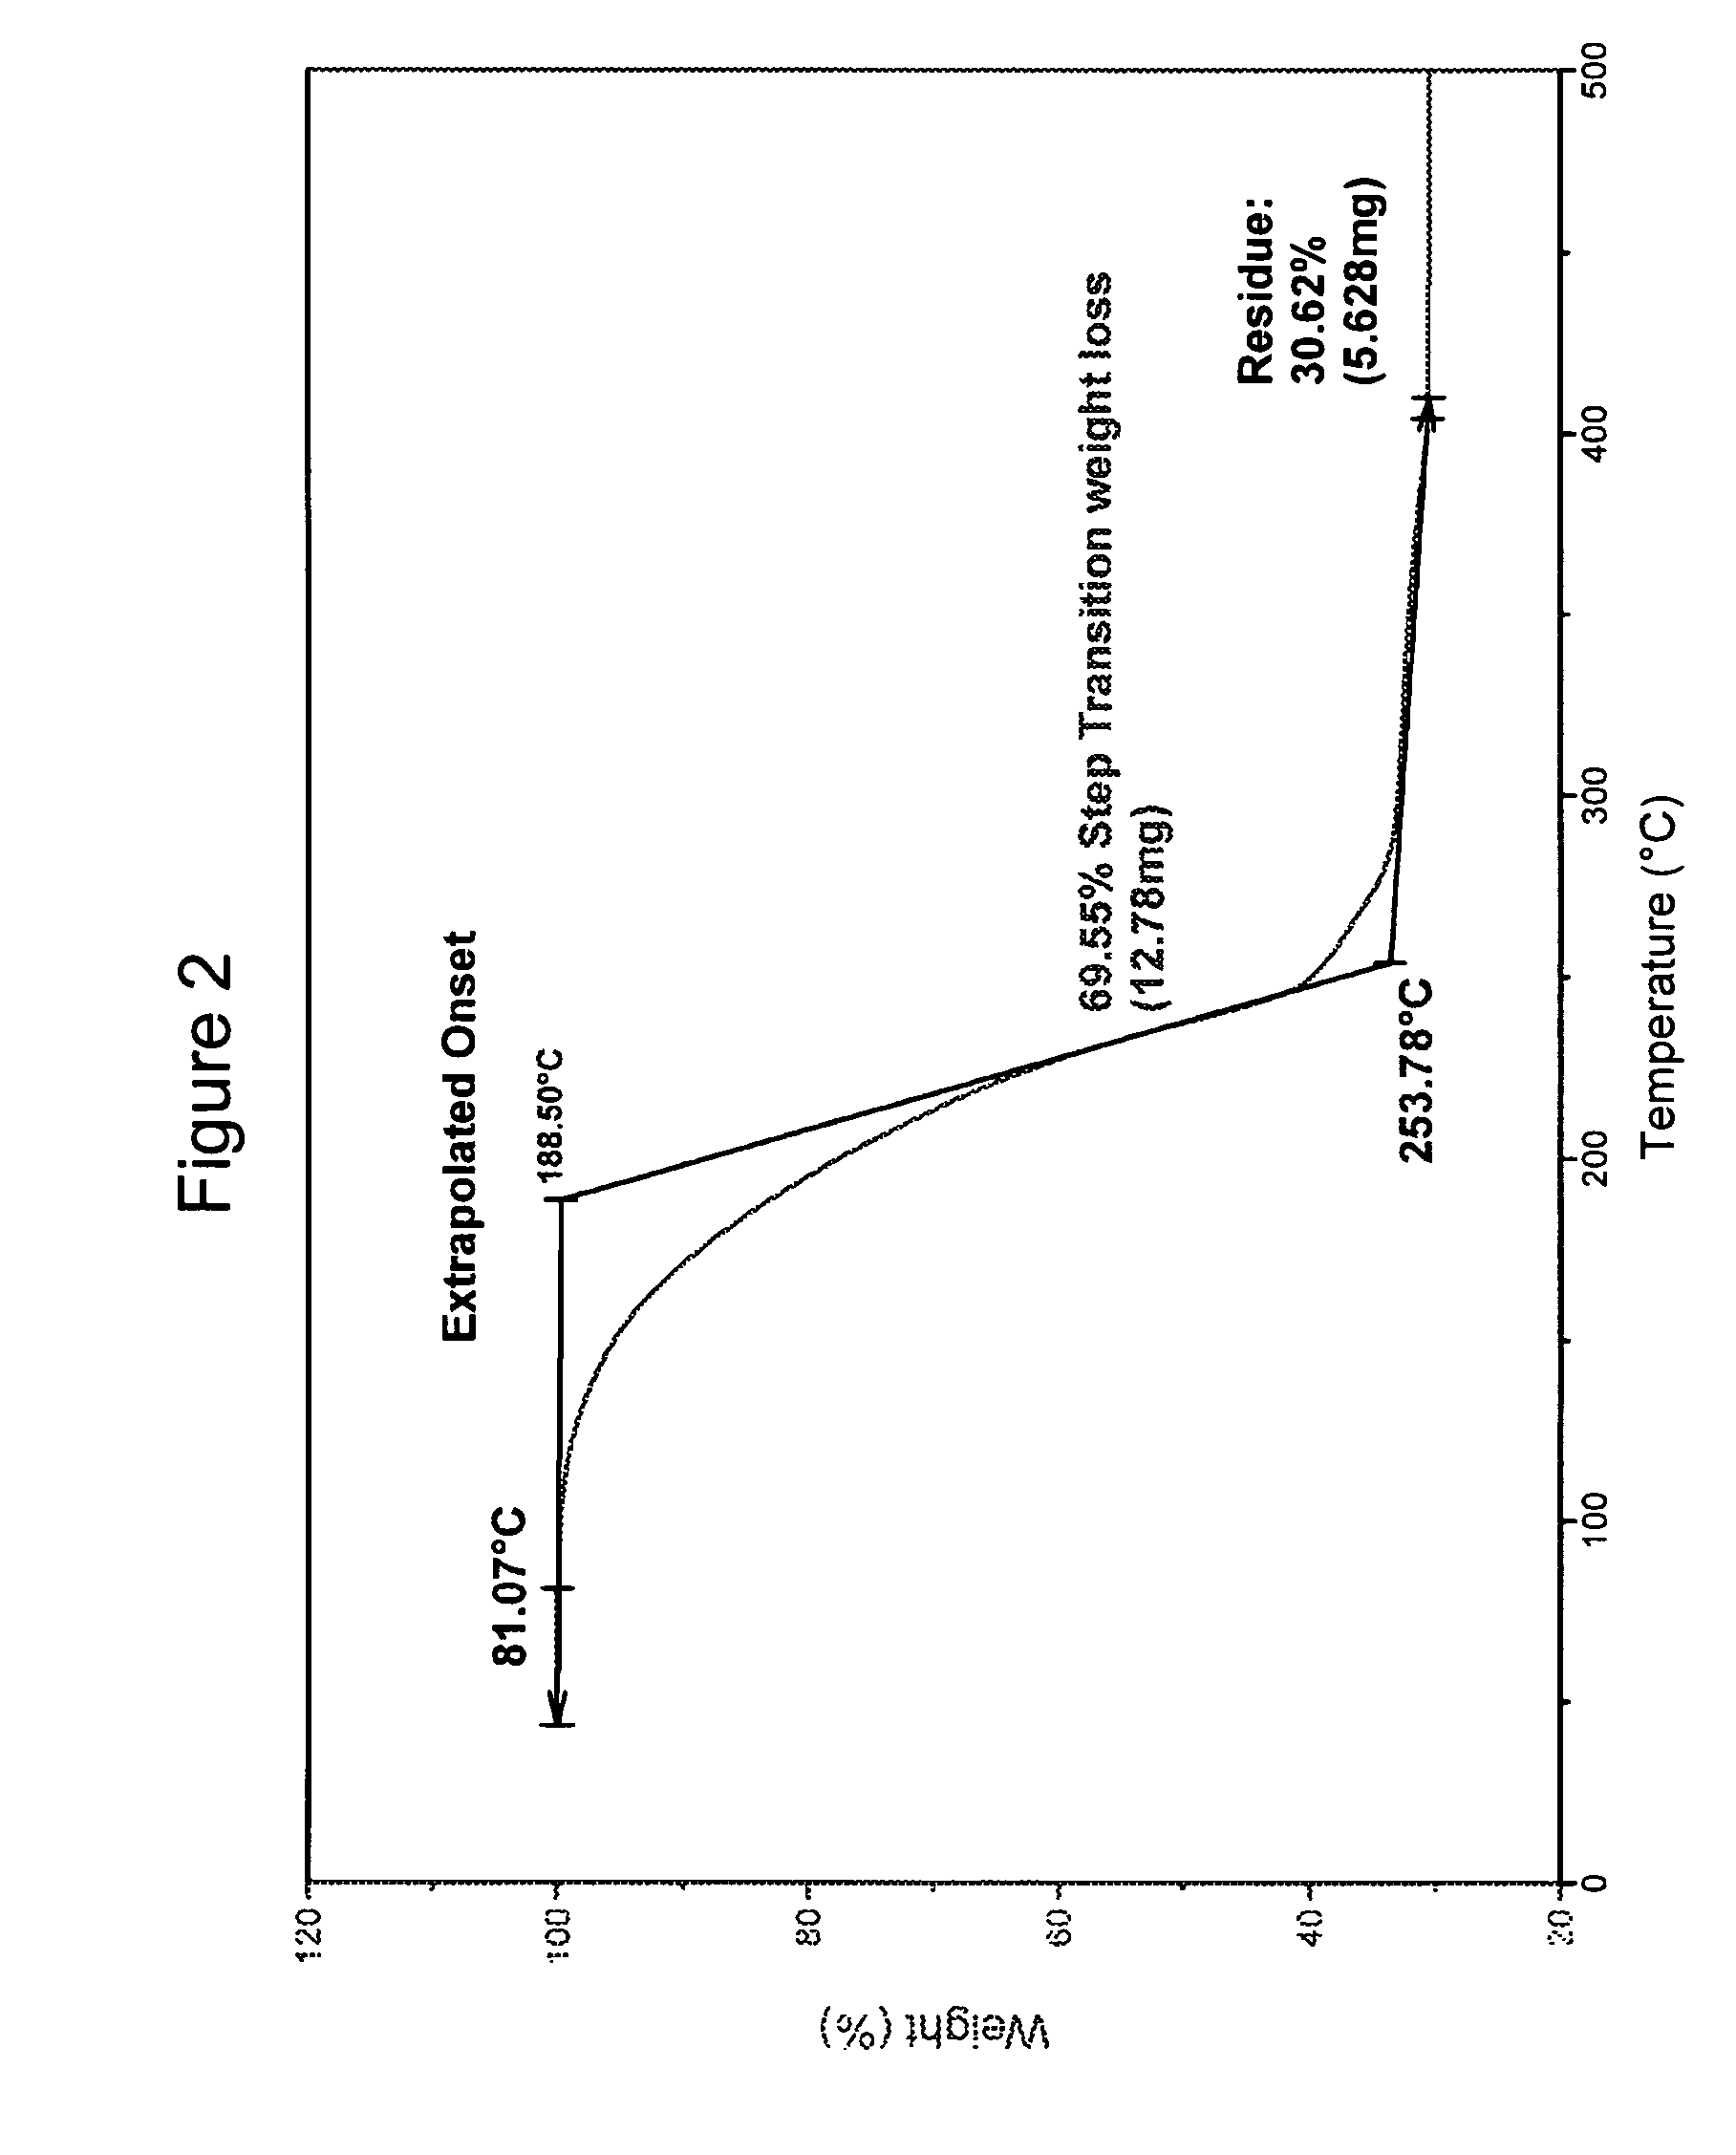 Single-source precursors for ternary chalcopyrite materials, and methods of making and using the same